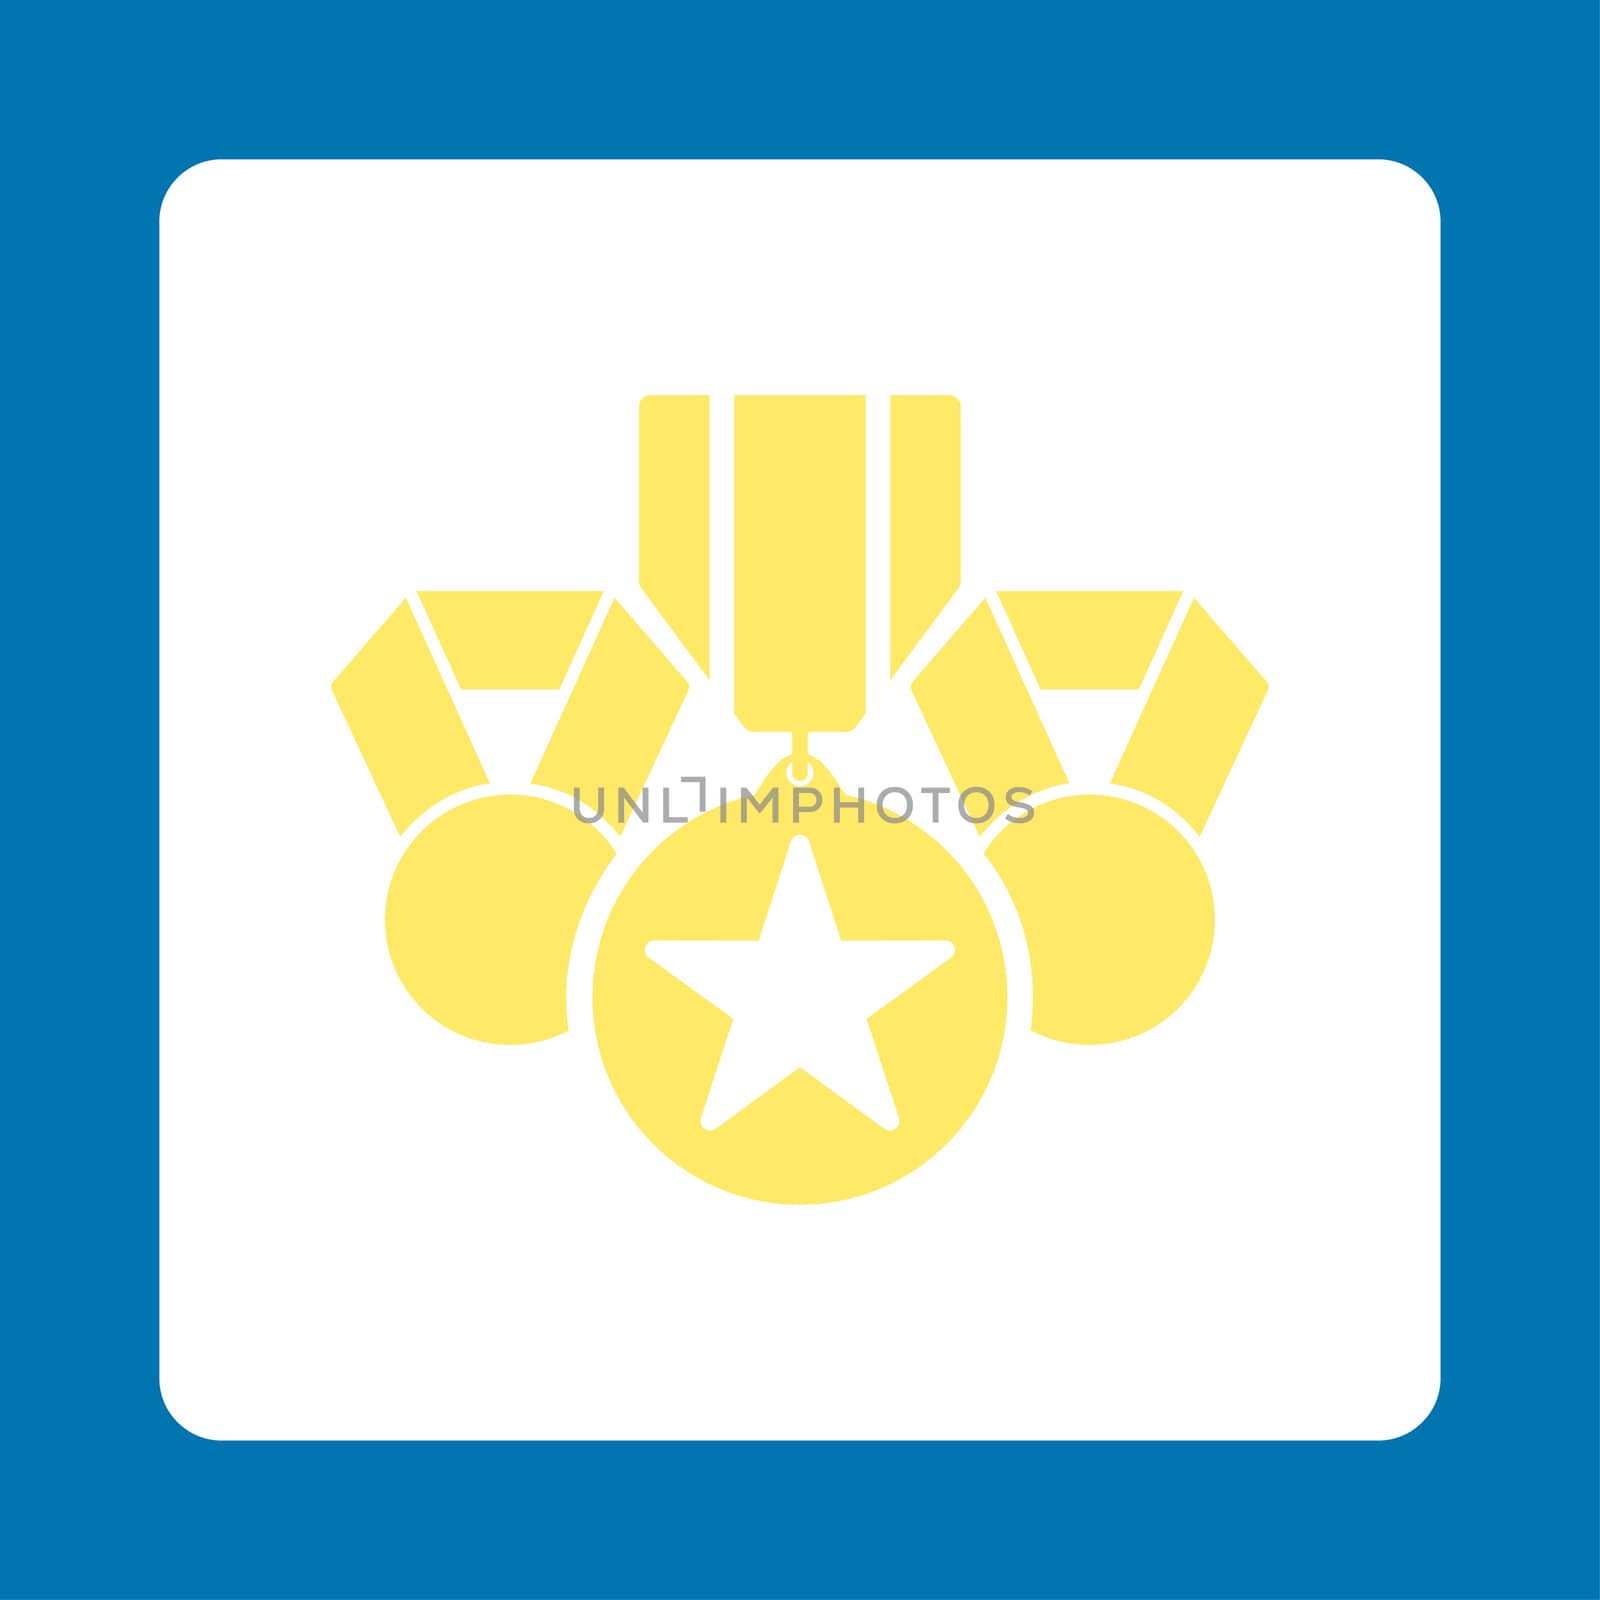 Awards icon from Award Buttons OverColor Set. Icon style is yellow and white colors, flat rounded square button, blue background.